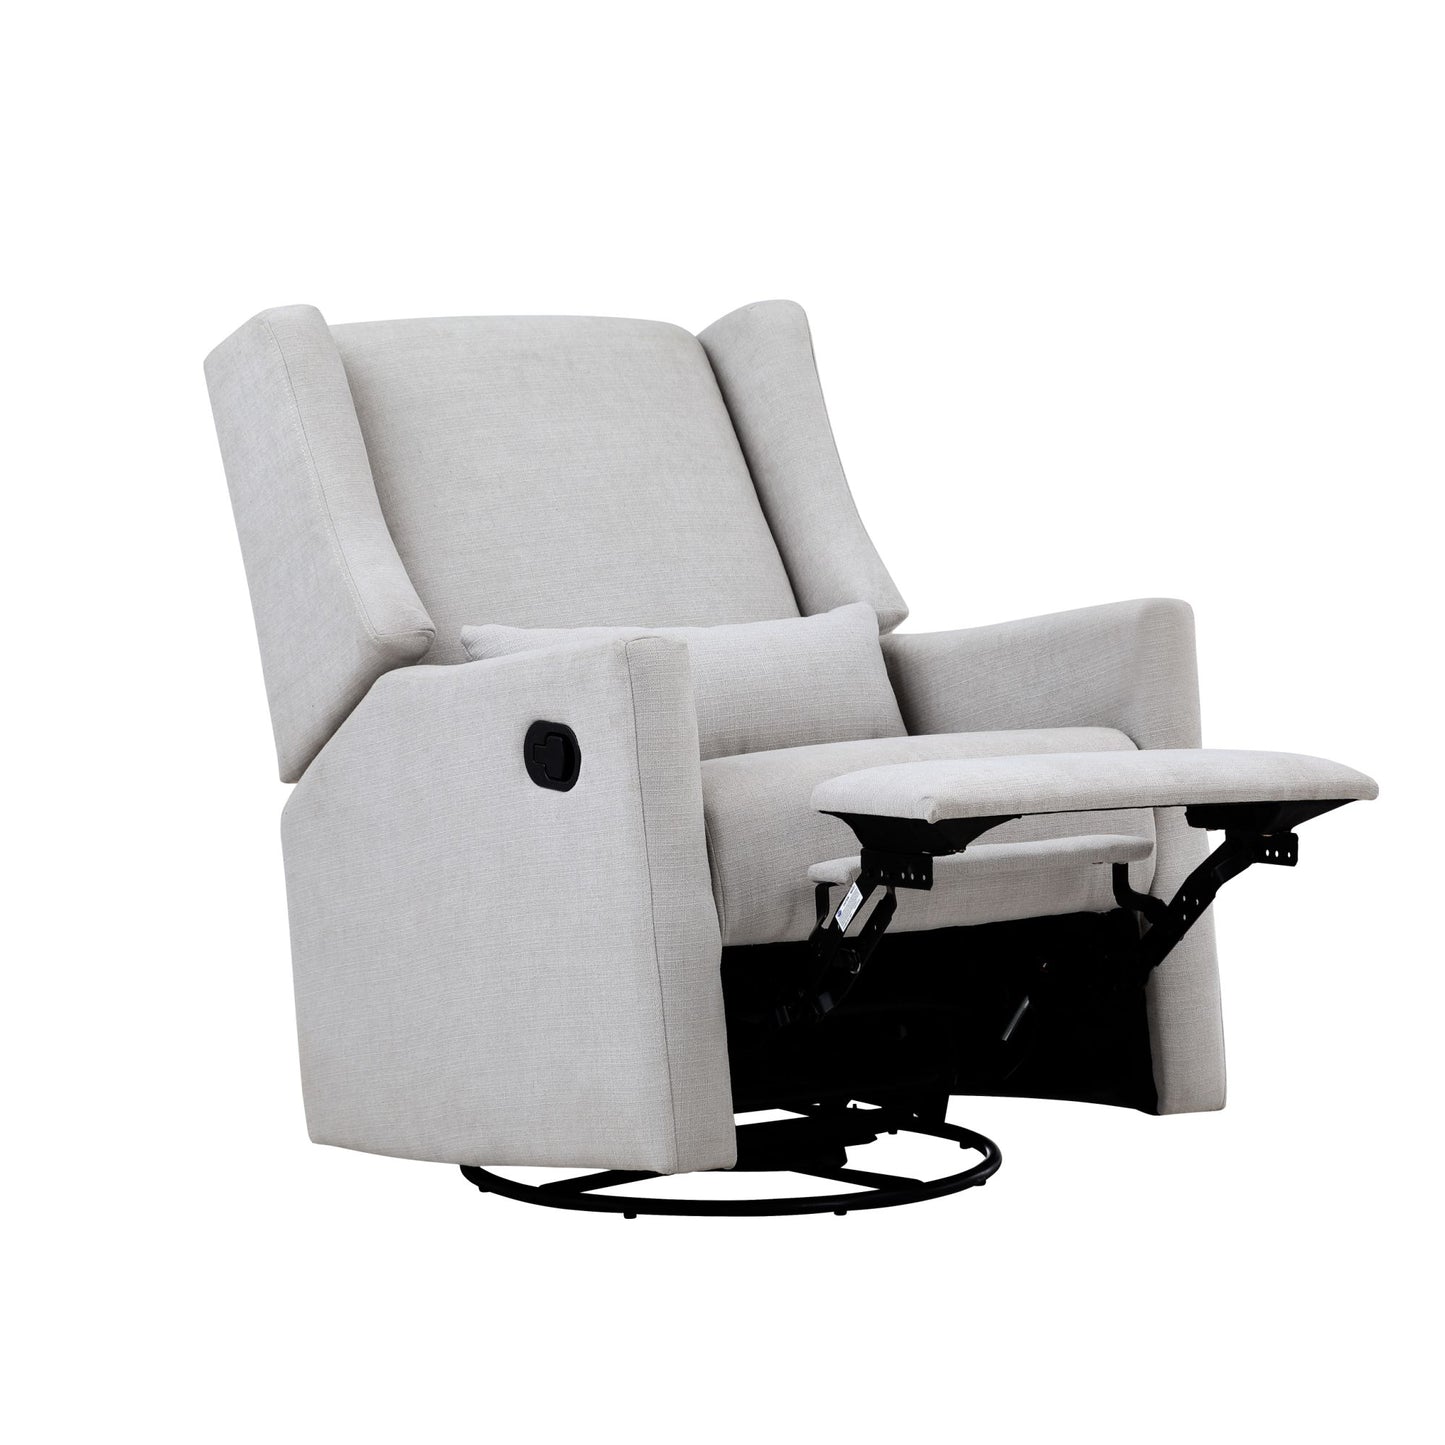 Pronto Swivel Glider Recliner with Pillow Blanco Fabric